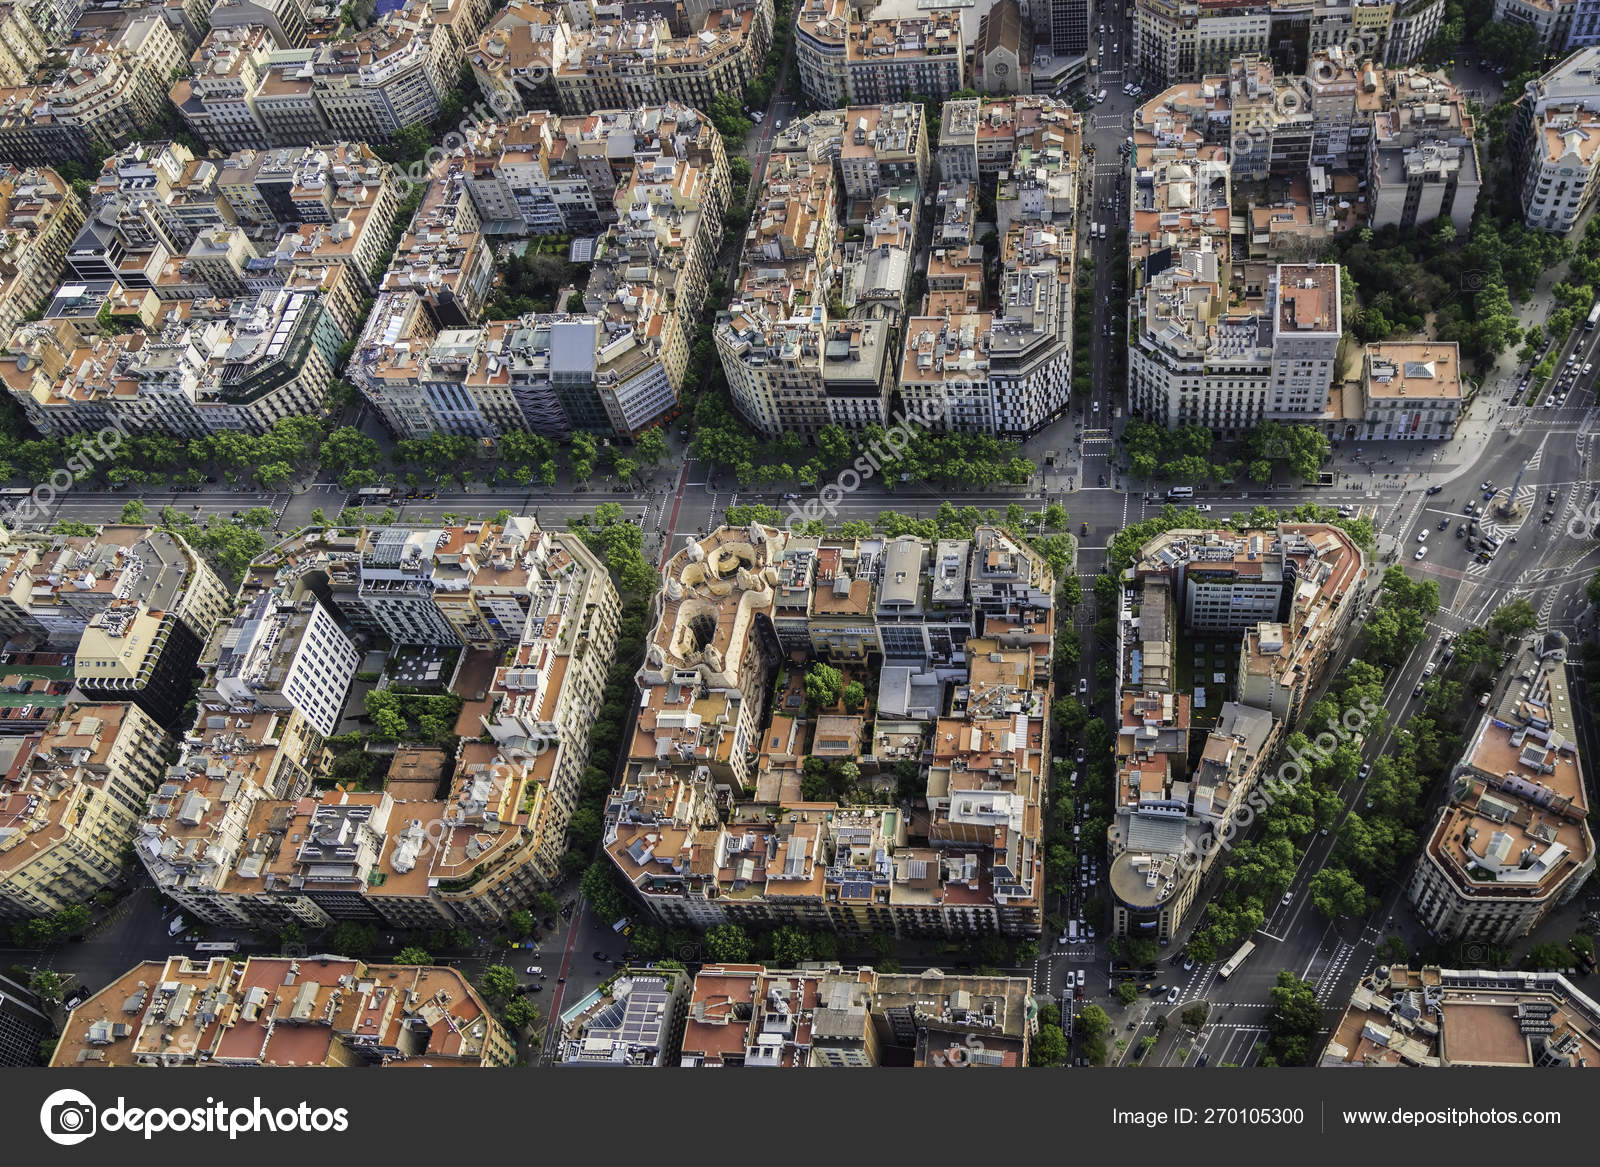 Aerial View Barcelona Buildings High Angle View City Typical Urban Stock Editorial Photo C Marchello74 270105300